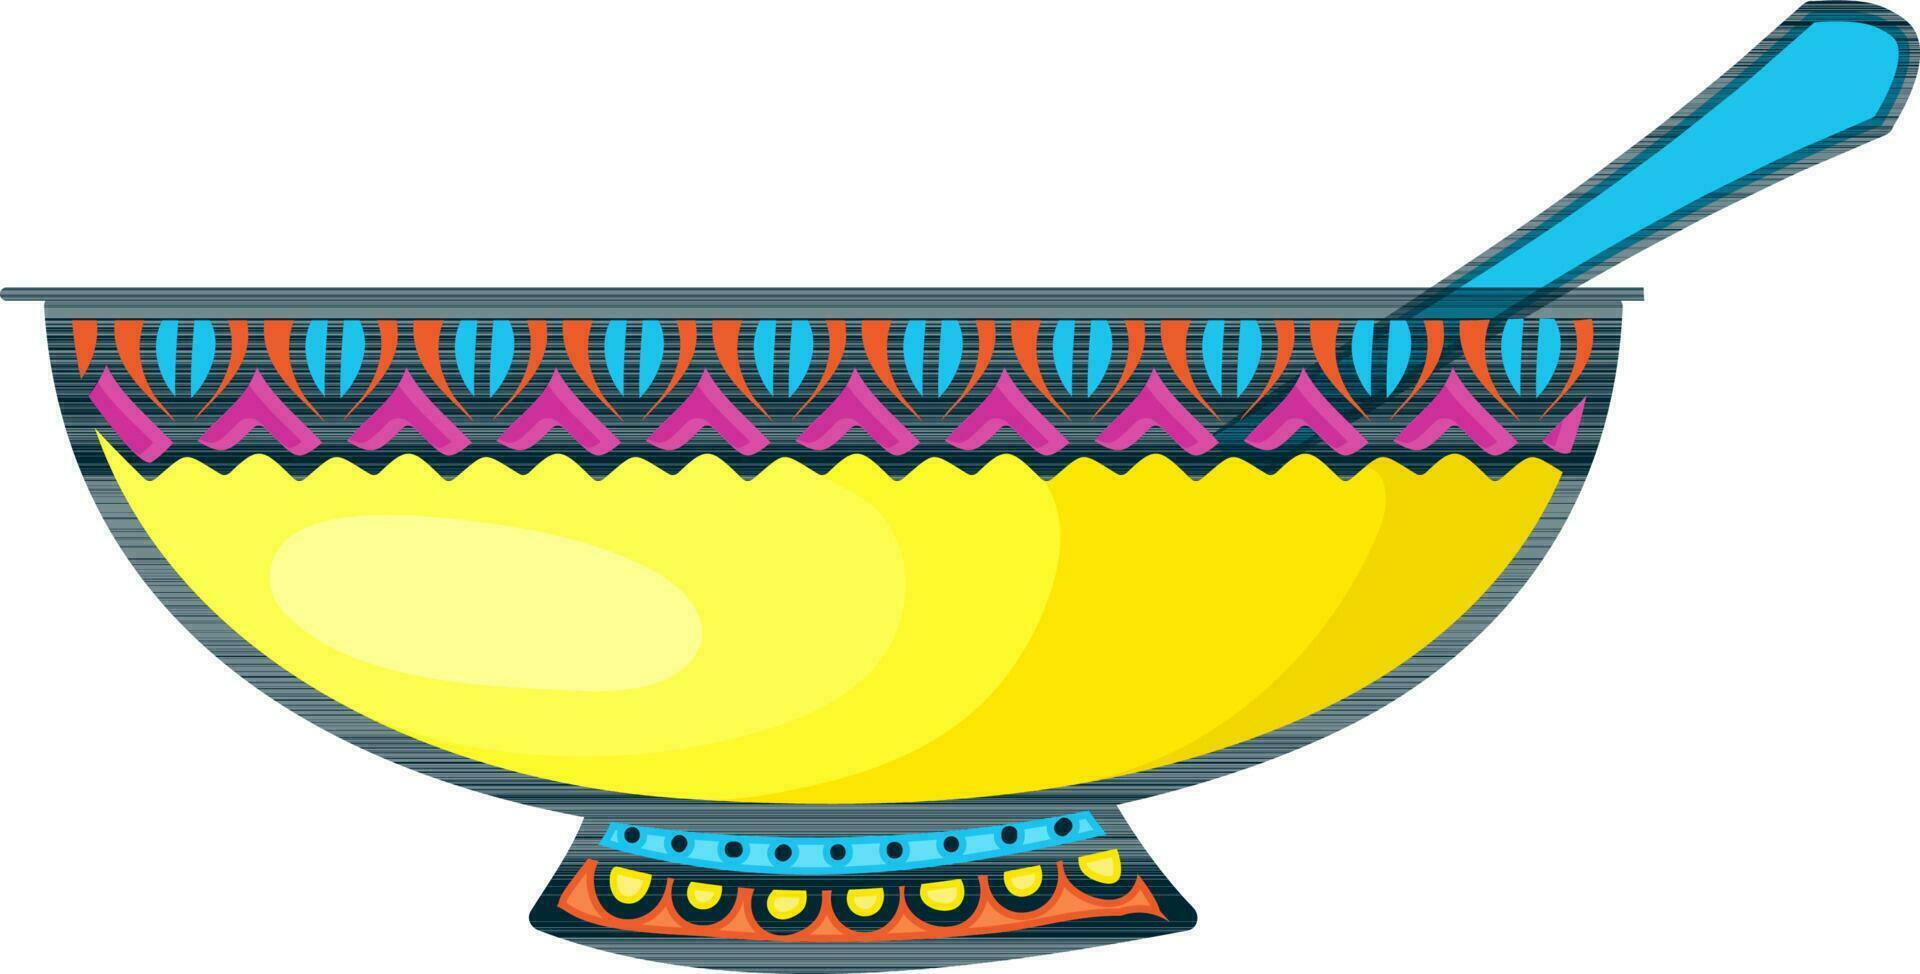 Decorative bowl with spoon. vector